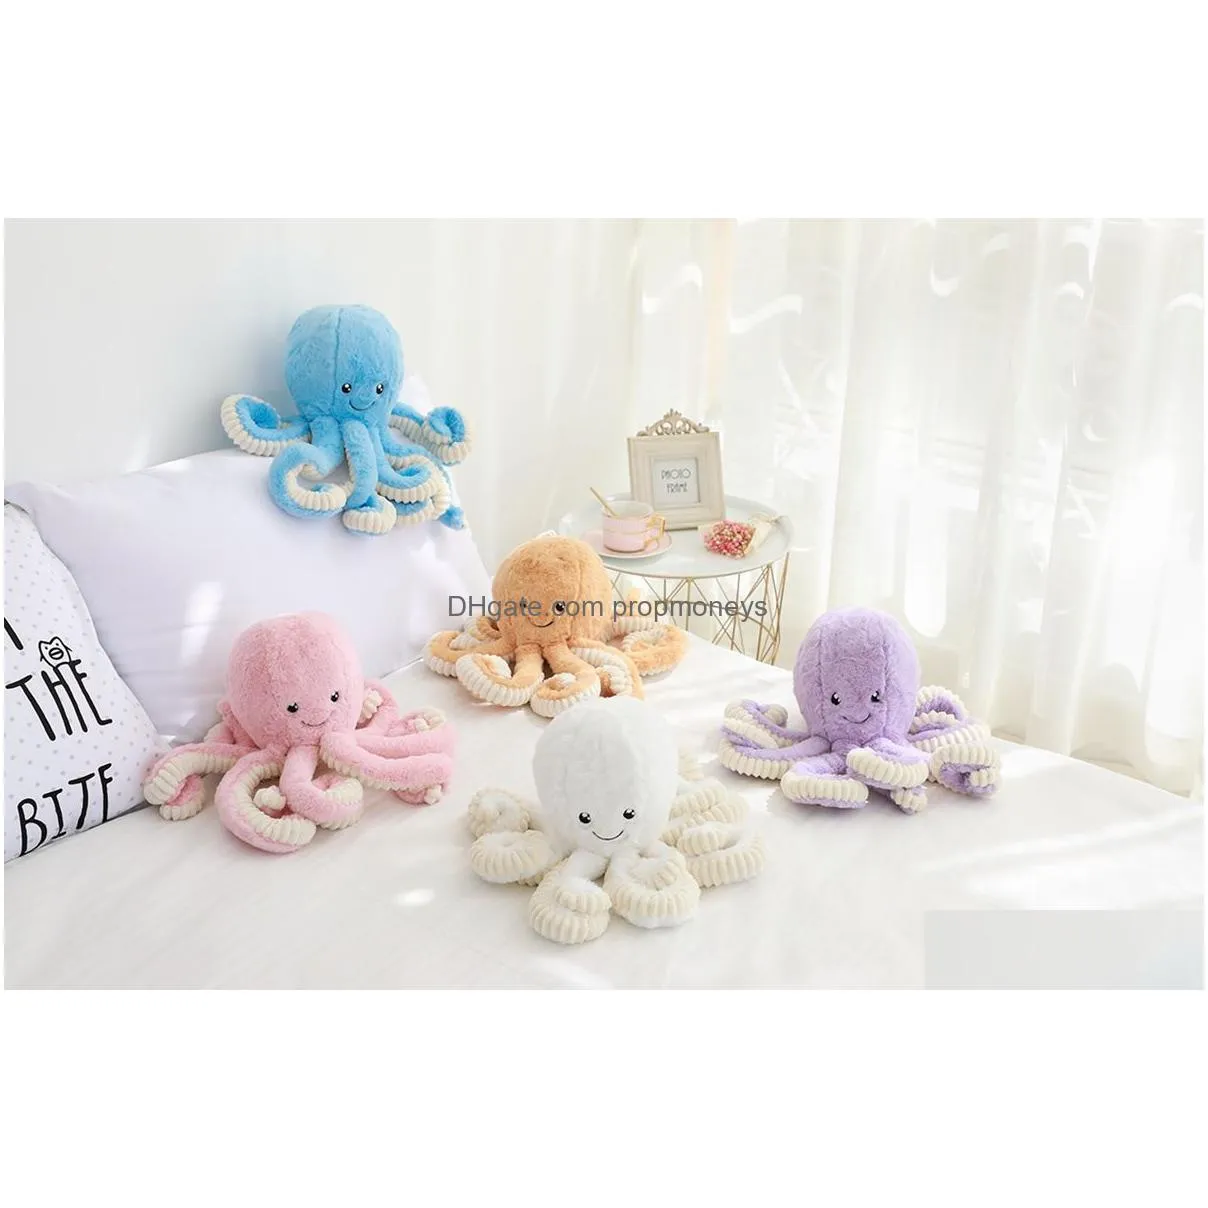 Stuffed & Plush Animals Hy Wy Toy Octopus Plush 80Cm Stuffed Animal Stuff Pillow Christmas Gift Squid Doll For Toys Gifts Stuffed Anim Dhwqd